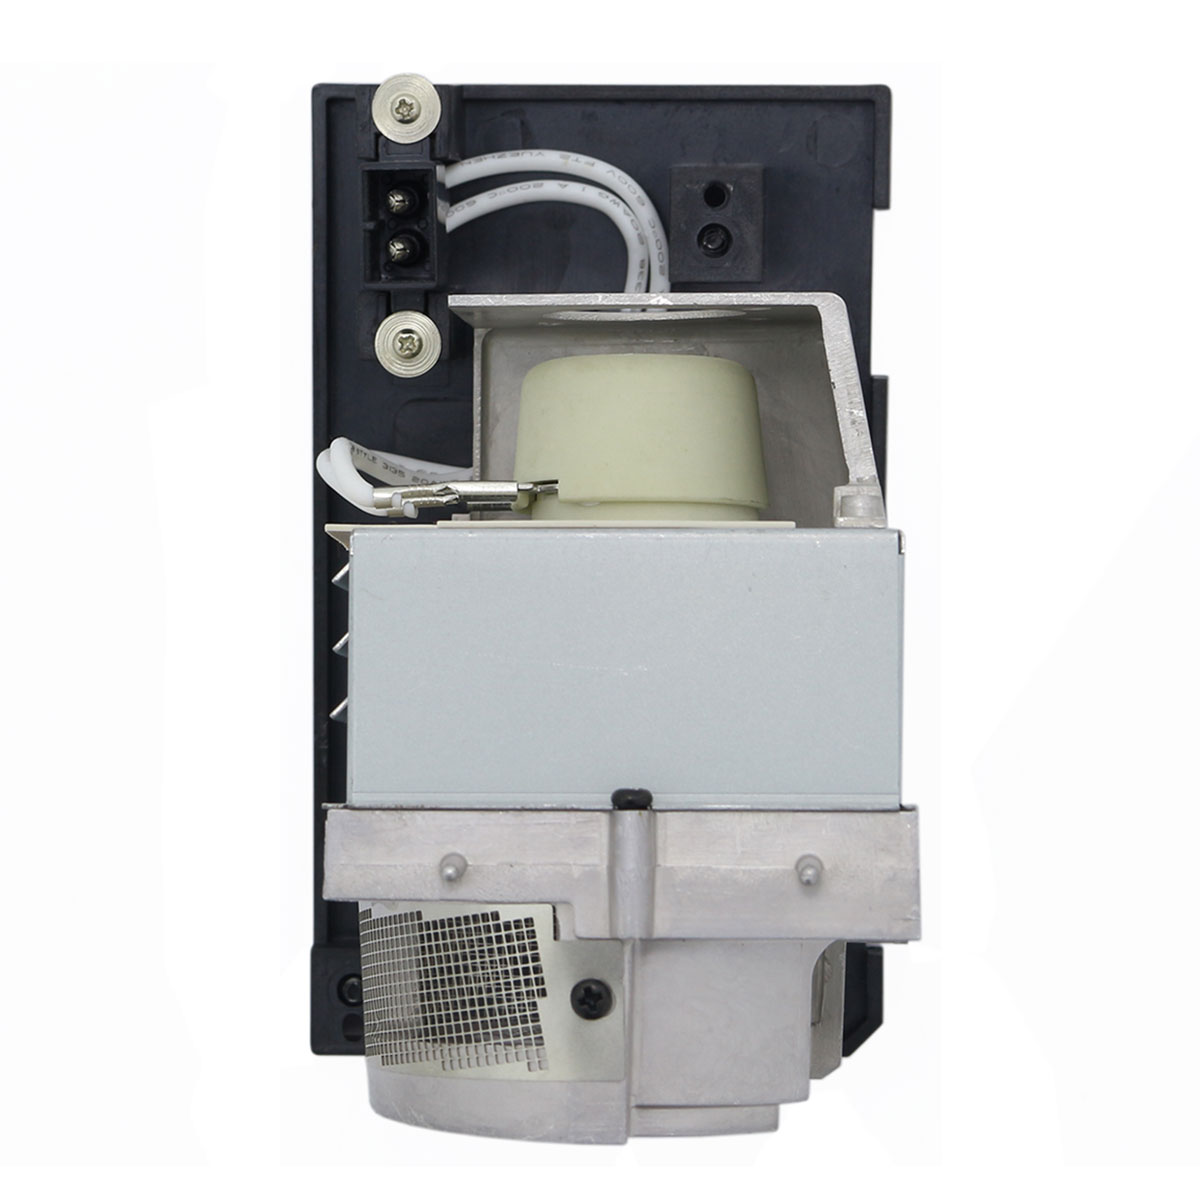 Original SP.71K01GC01 Replacement Lamp & Housing for Optoma Projectors - image 4 of 7